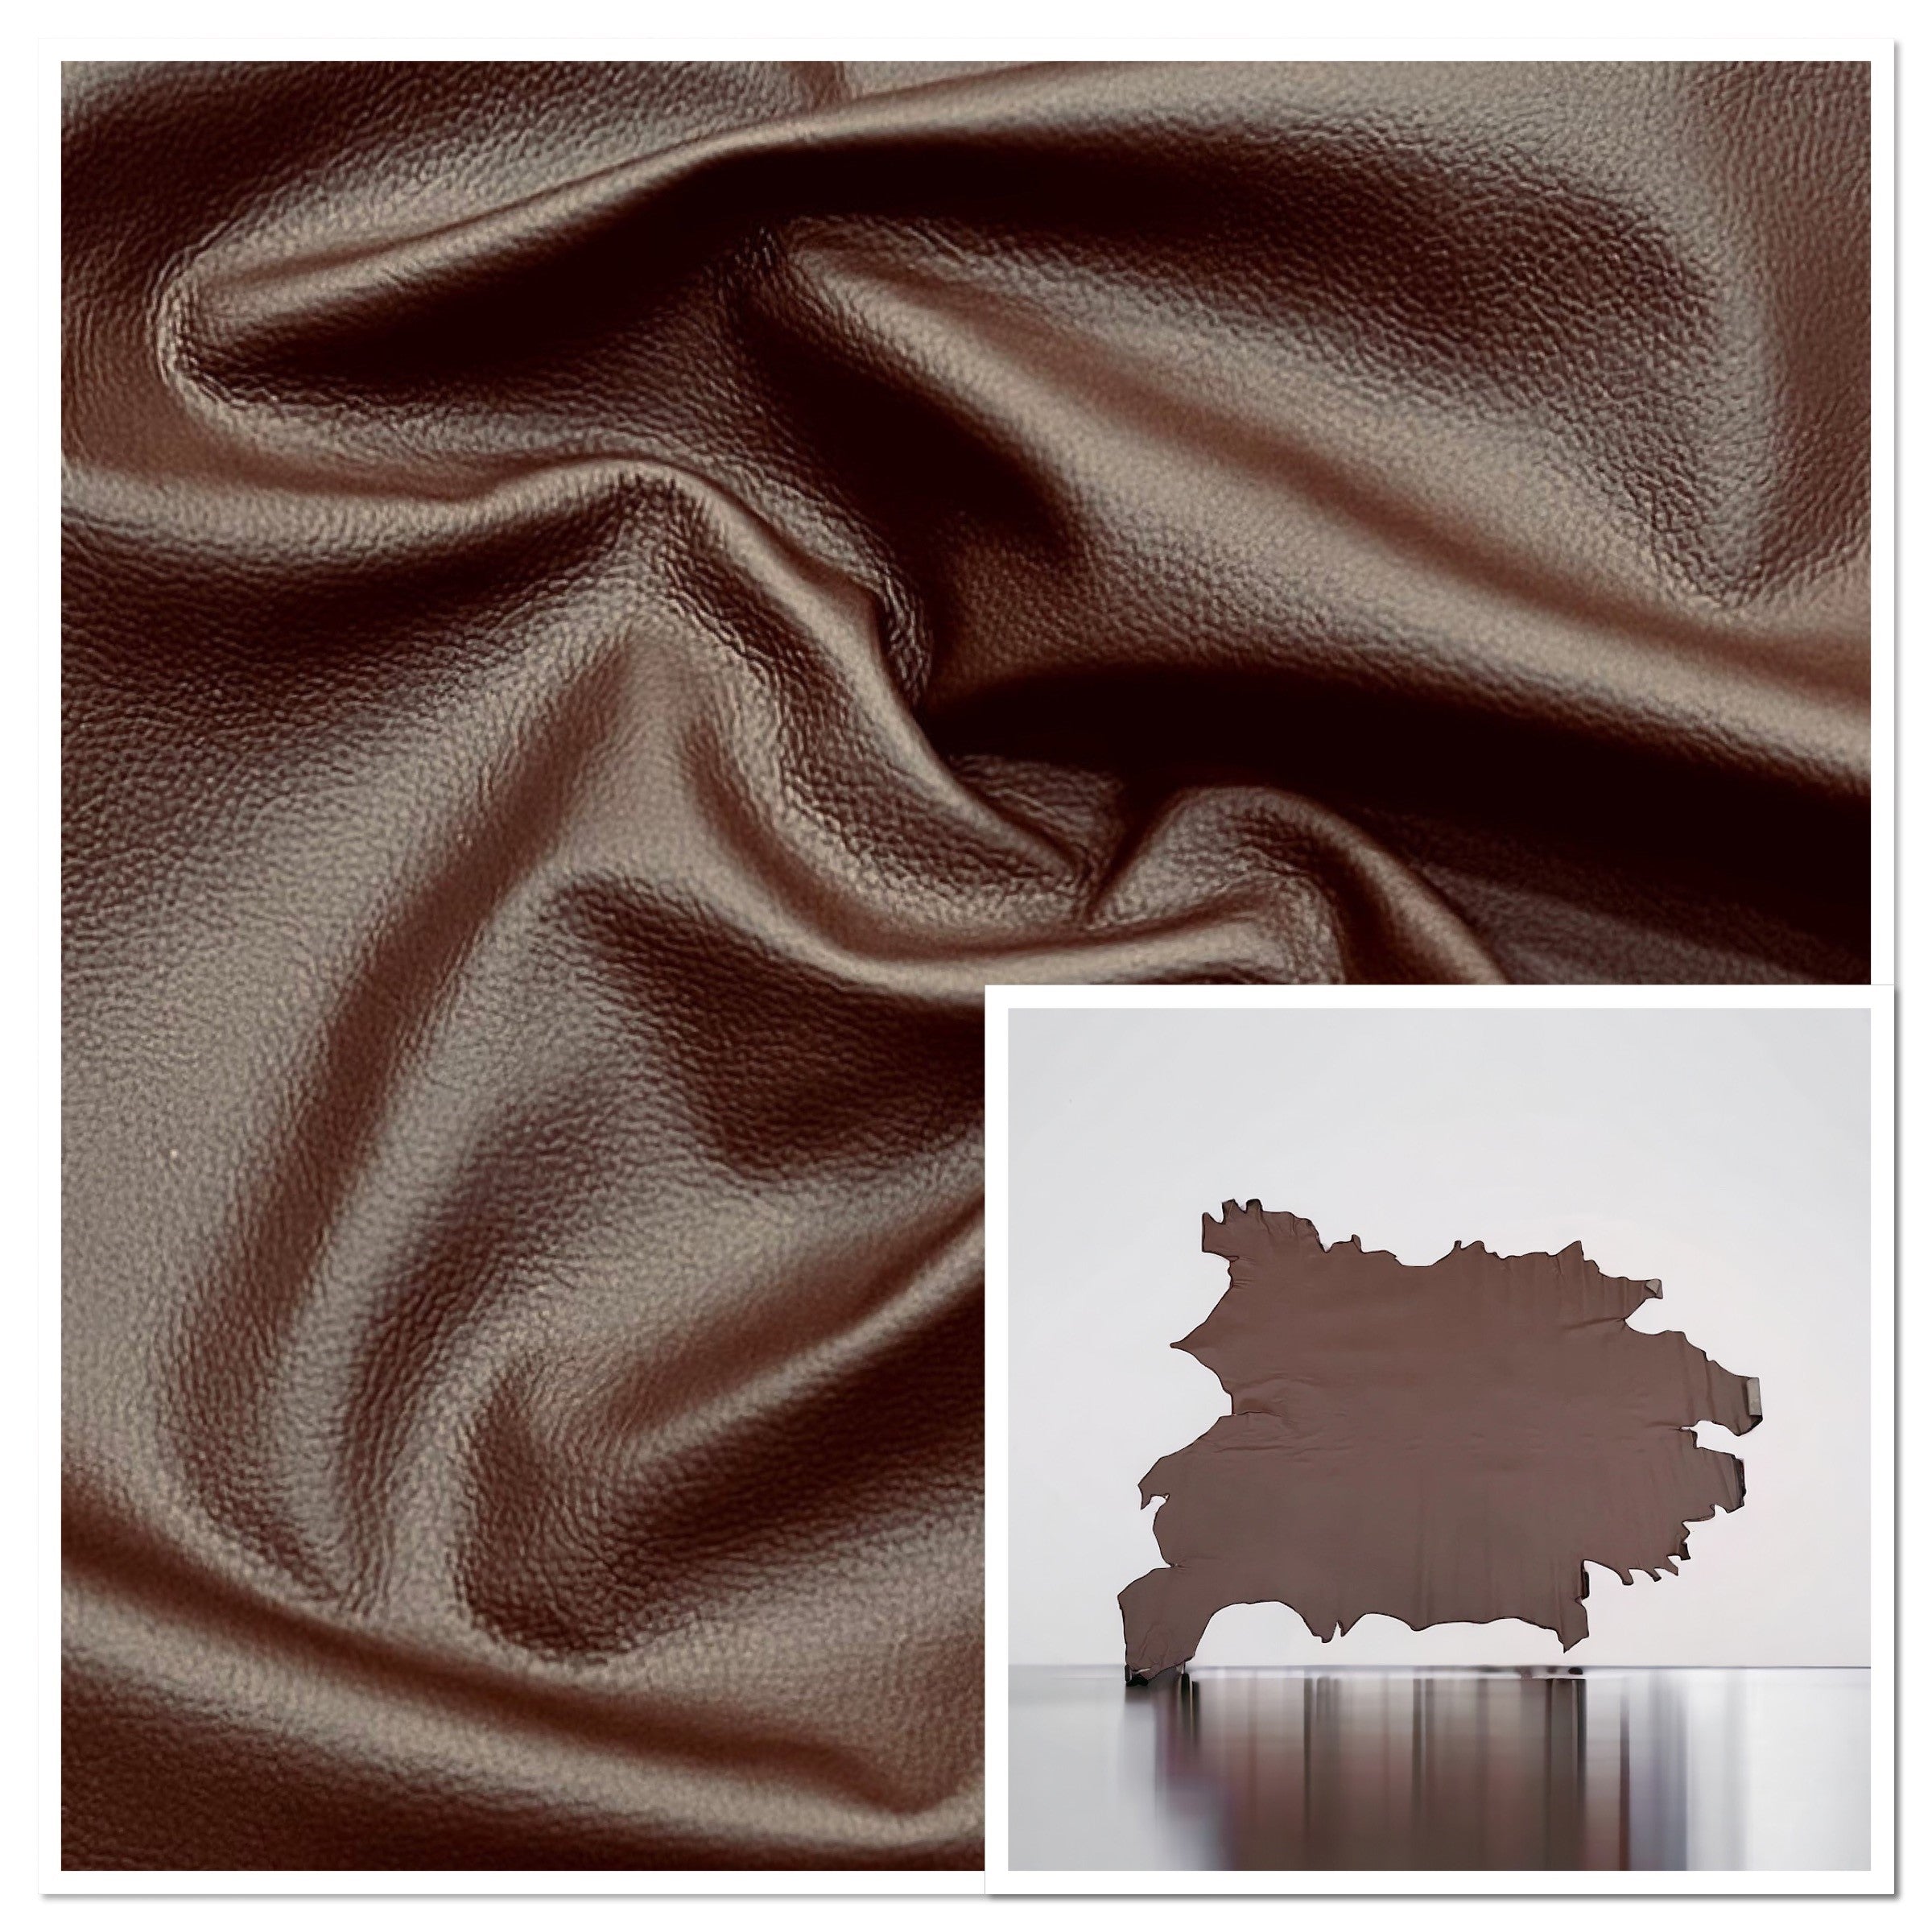 Stirling Pebble Brown Automotive Pebble Grain Leather Cow Hide : 1.1-1.3mm (Ex Pittards Stock)